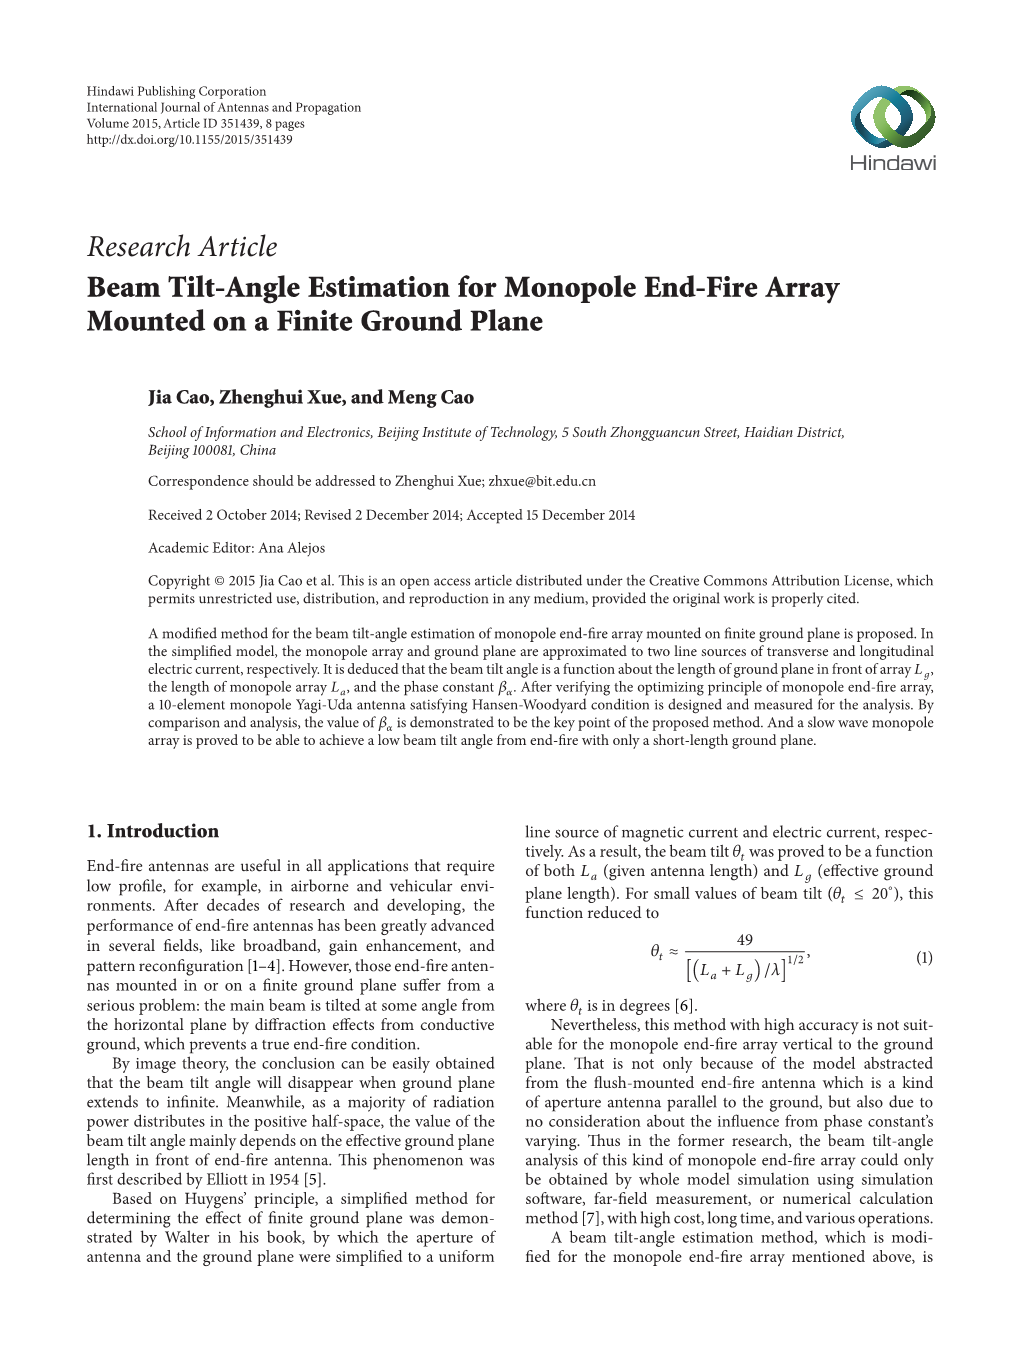 Beam Tilt-Angle Estimation for Monopole End-Fire Array Mounted on a Finite Ground Plane